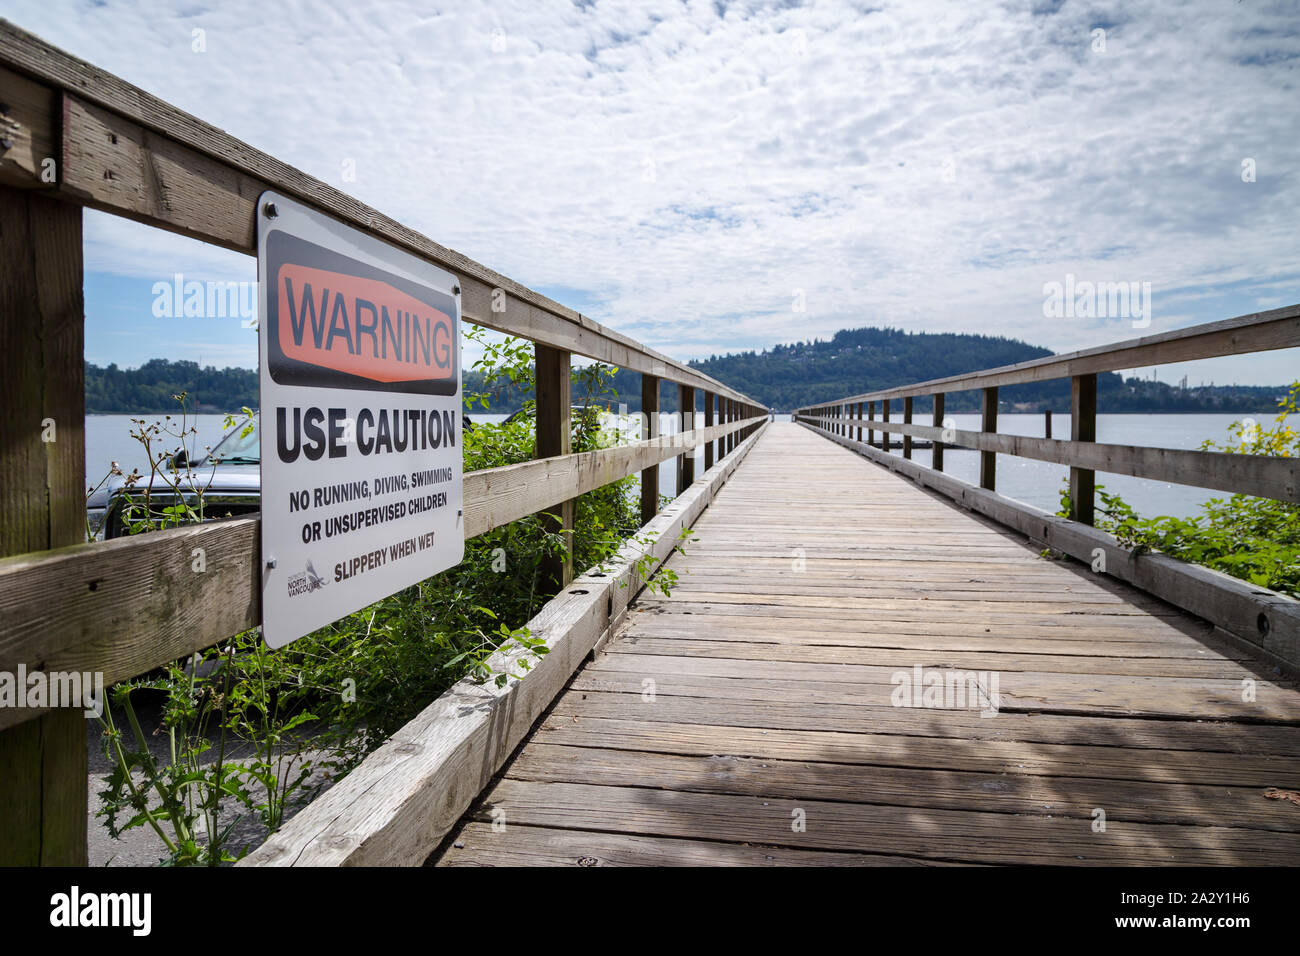 NORTH VANCOUVER, BC, CANADA - SEPT 1, 2019: A caution sign at the pier near the boat slip in Cates Park. Stock Photo